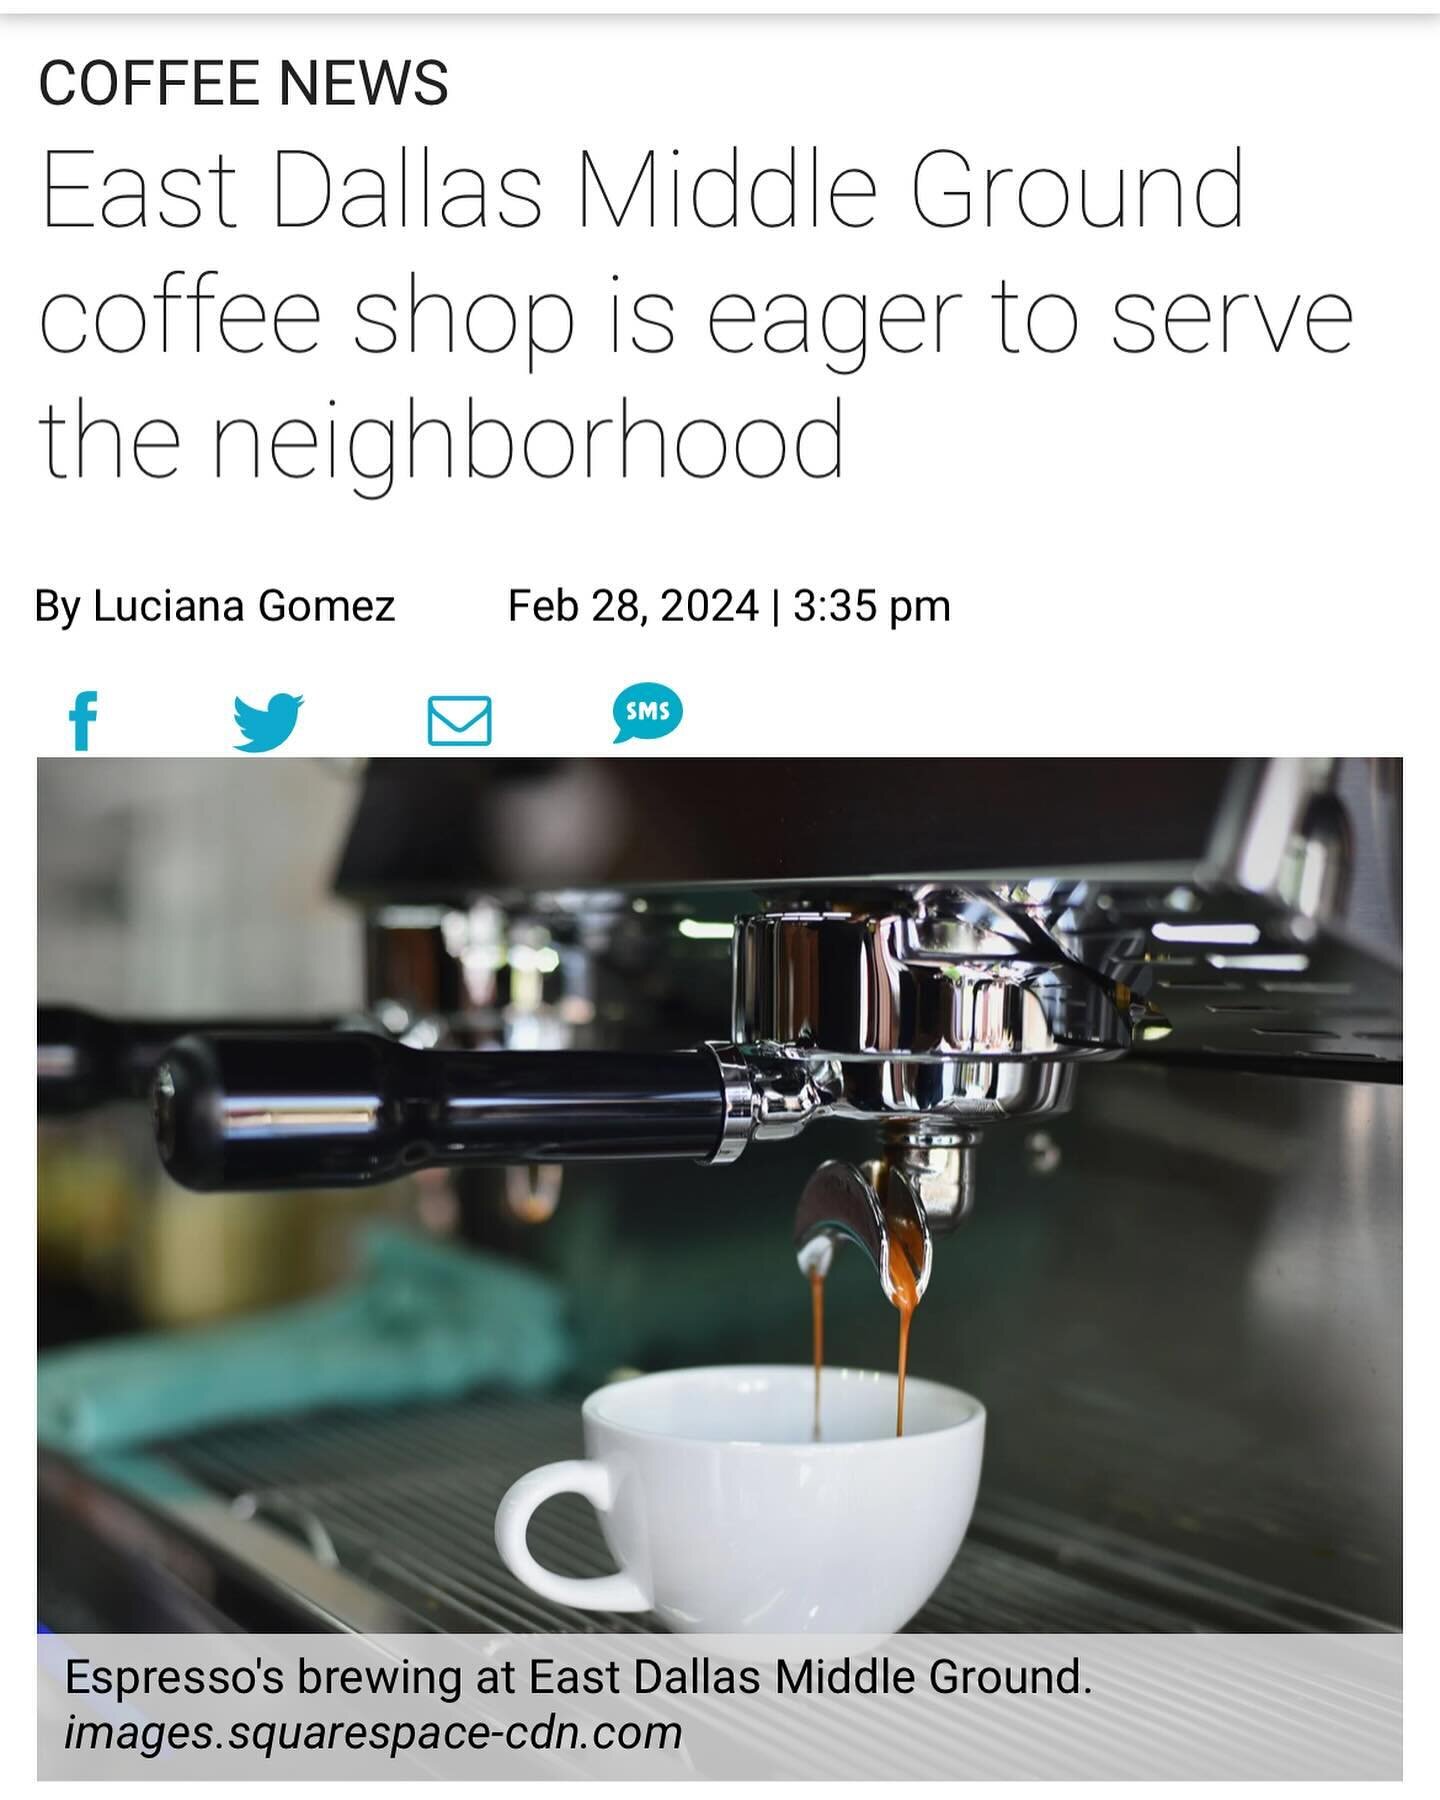 Thanks to @culturemapdal for the 🩵🩶🩵🩶

https://dallas.culturemap.com/news/restaurants-bars/east-dallas-middle-ground-coffee/